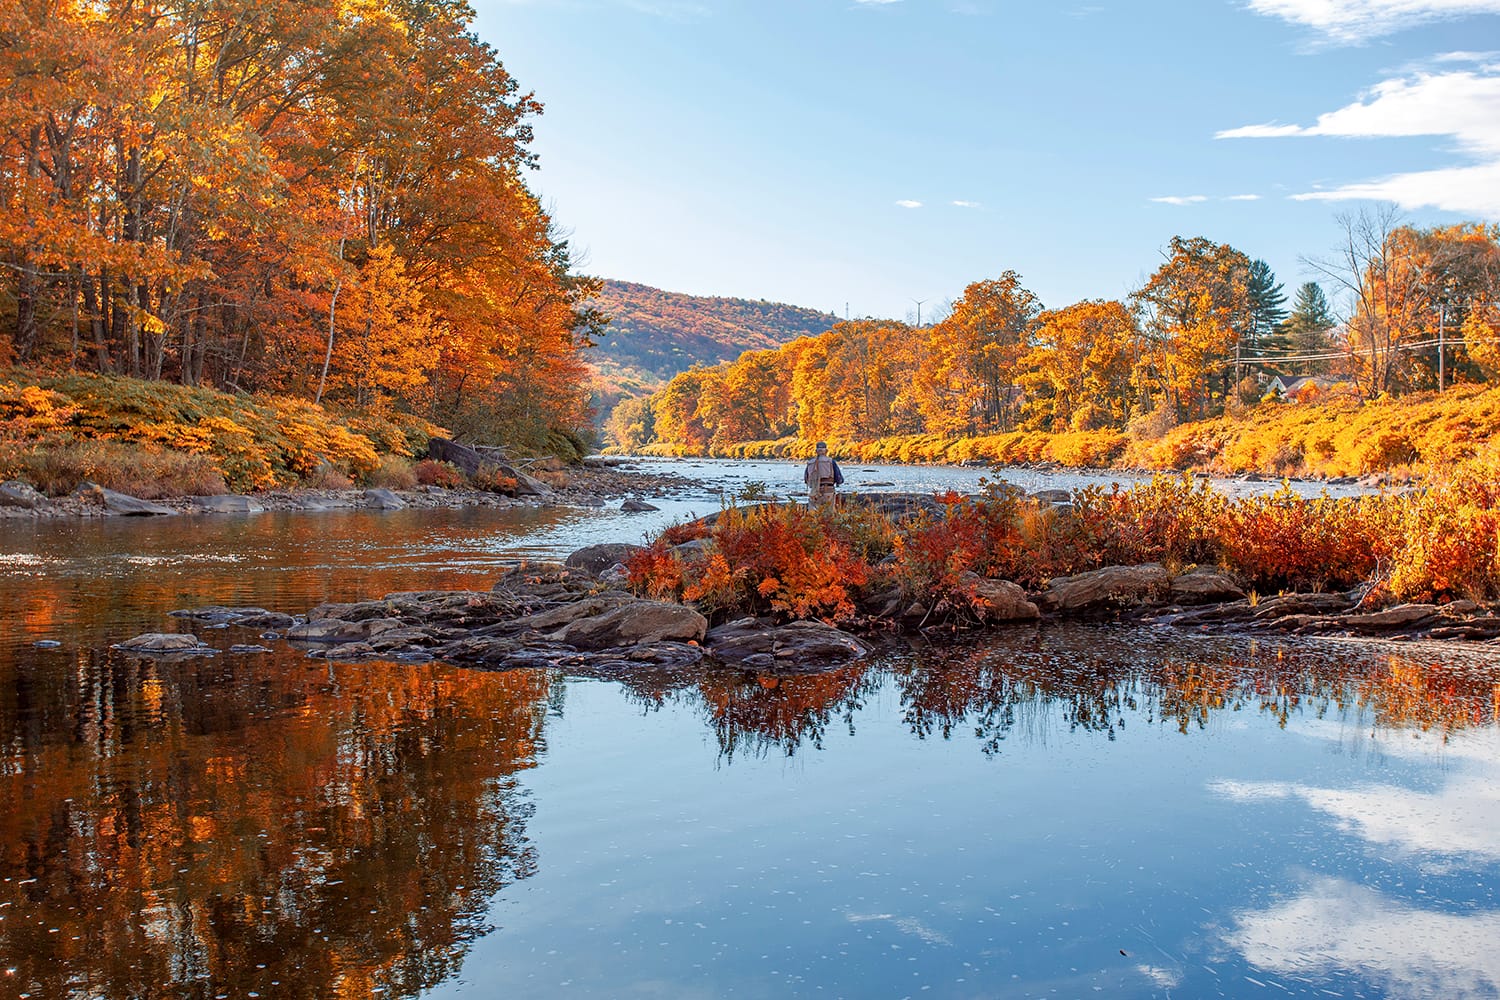 A fly fisherman on the Deerfield River in the Berkshires of Massachusetts during the fall foliage in October